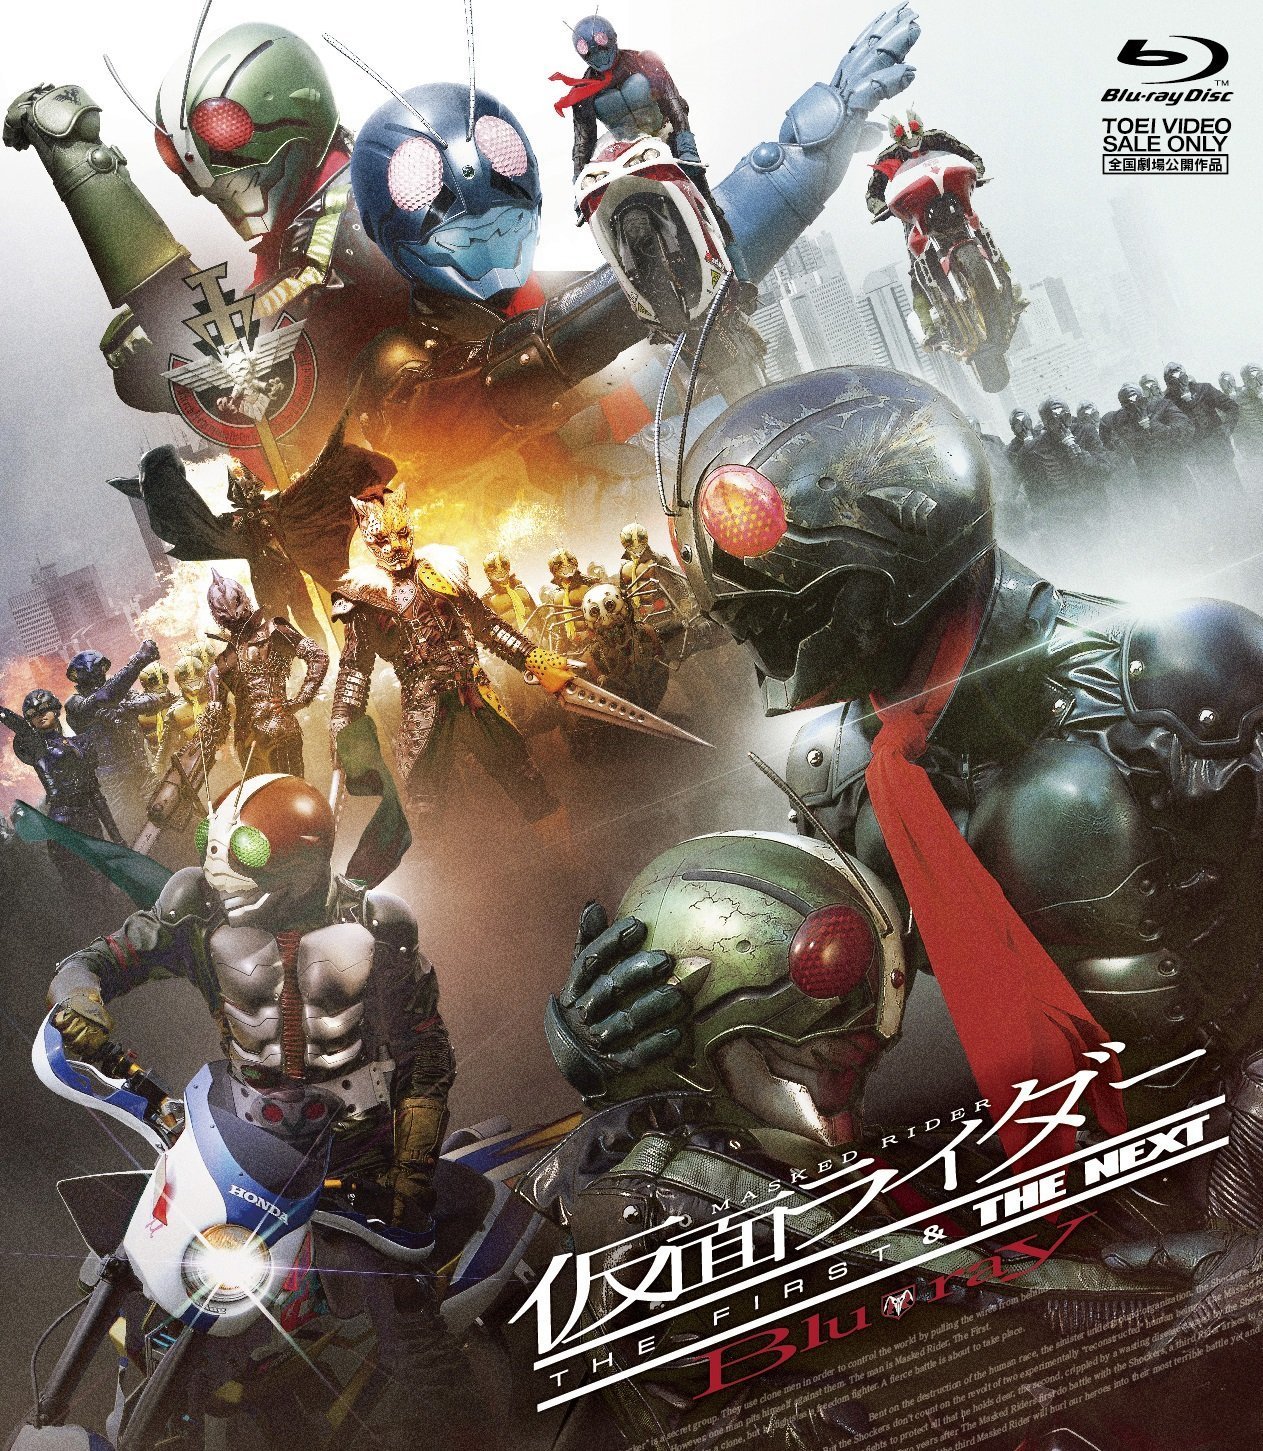 Kamen Rider: The First & The Next are the best way to get into Kamen Rider